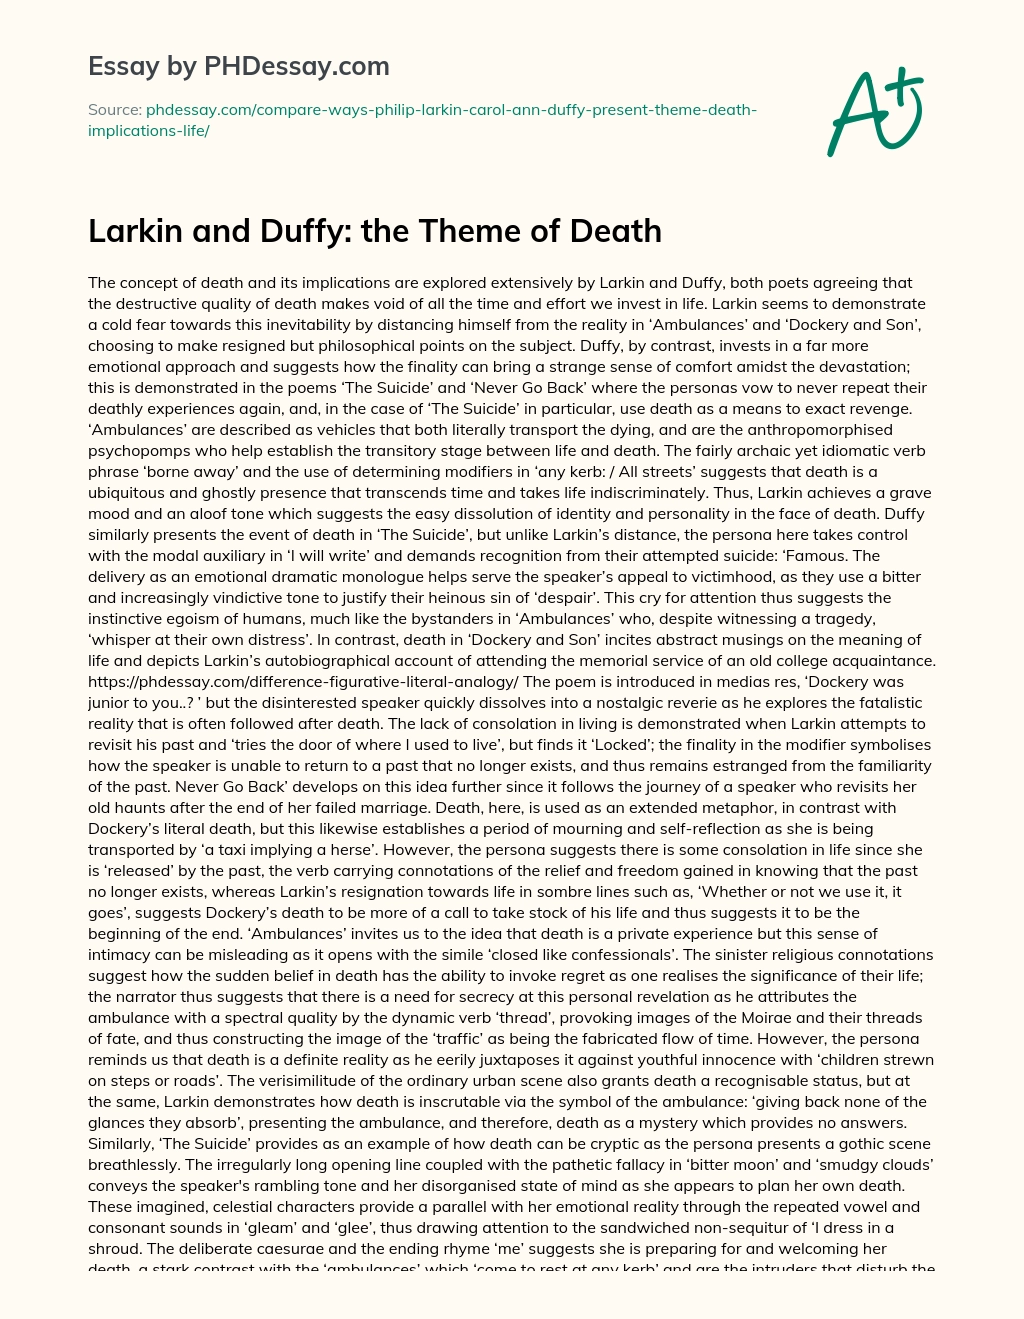 Larkin and Duffy: the Theme of Death essay